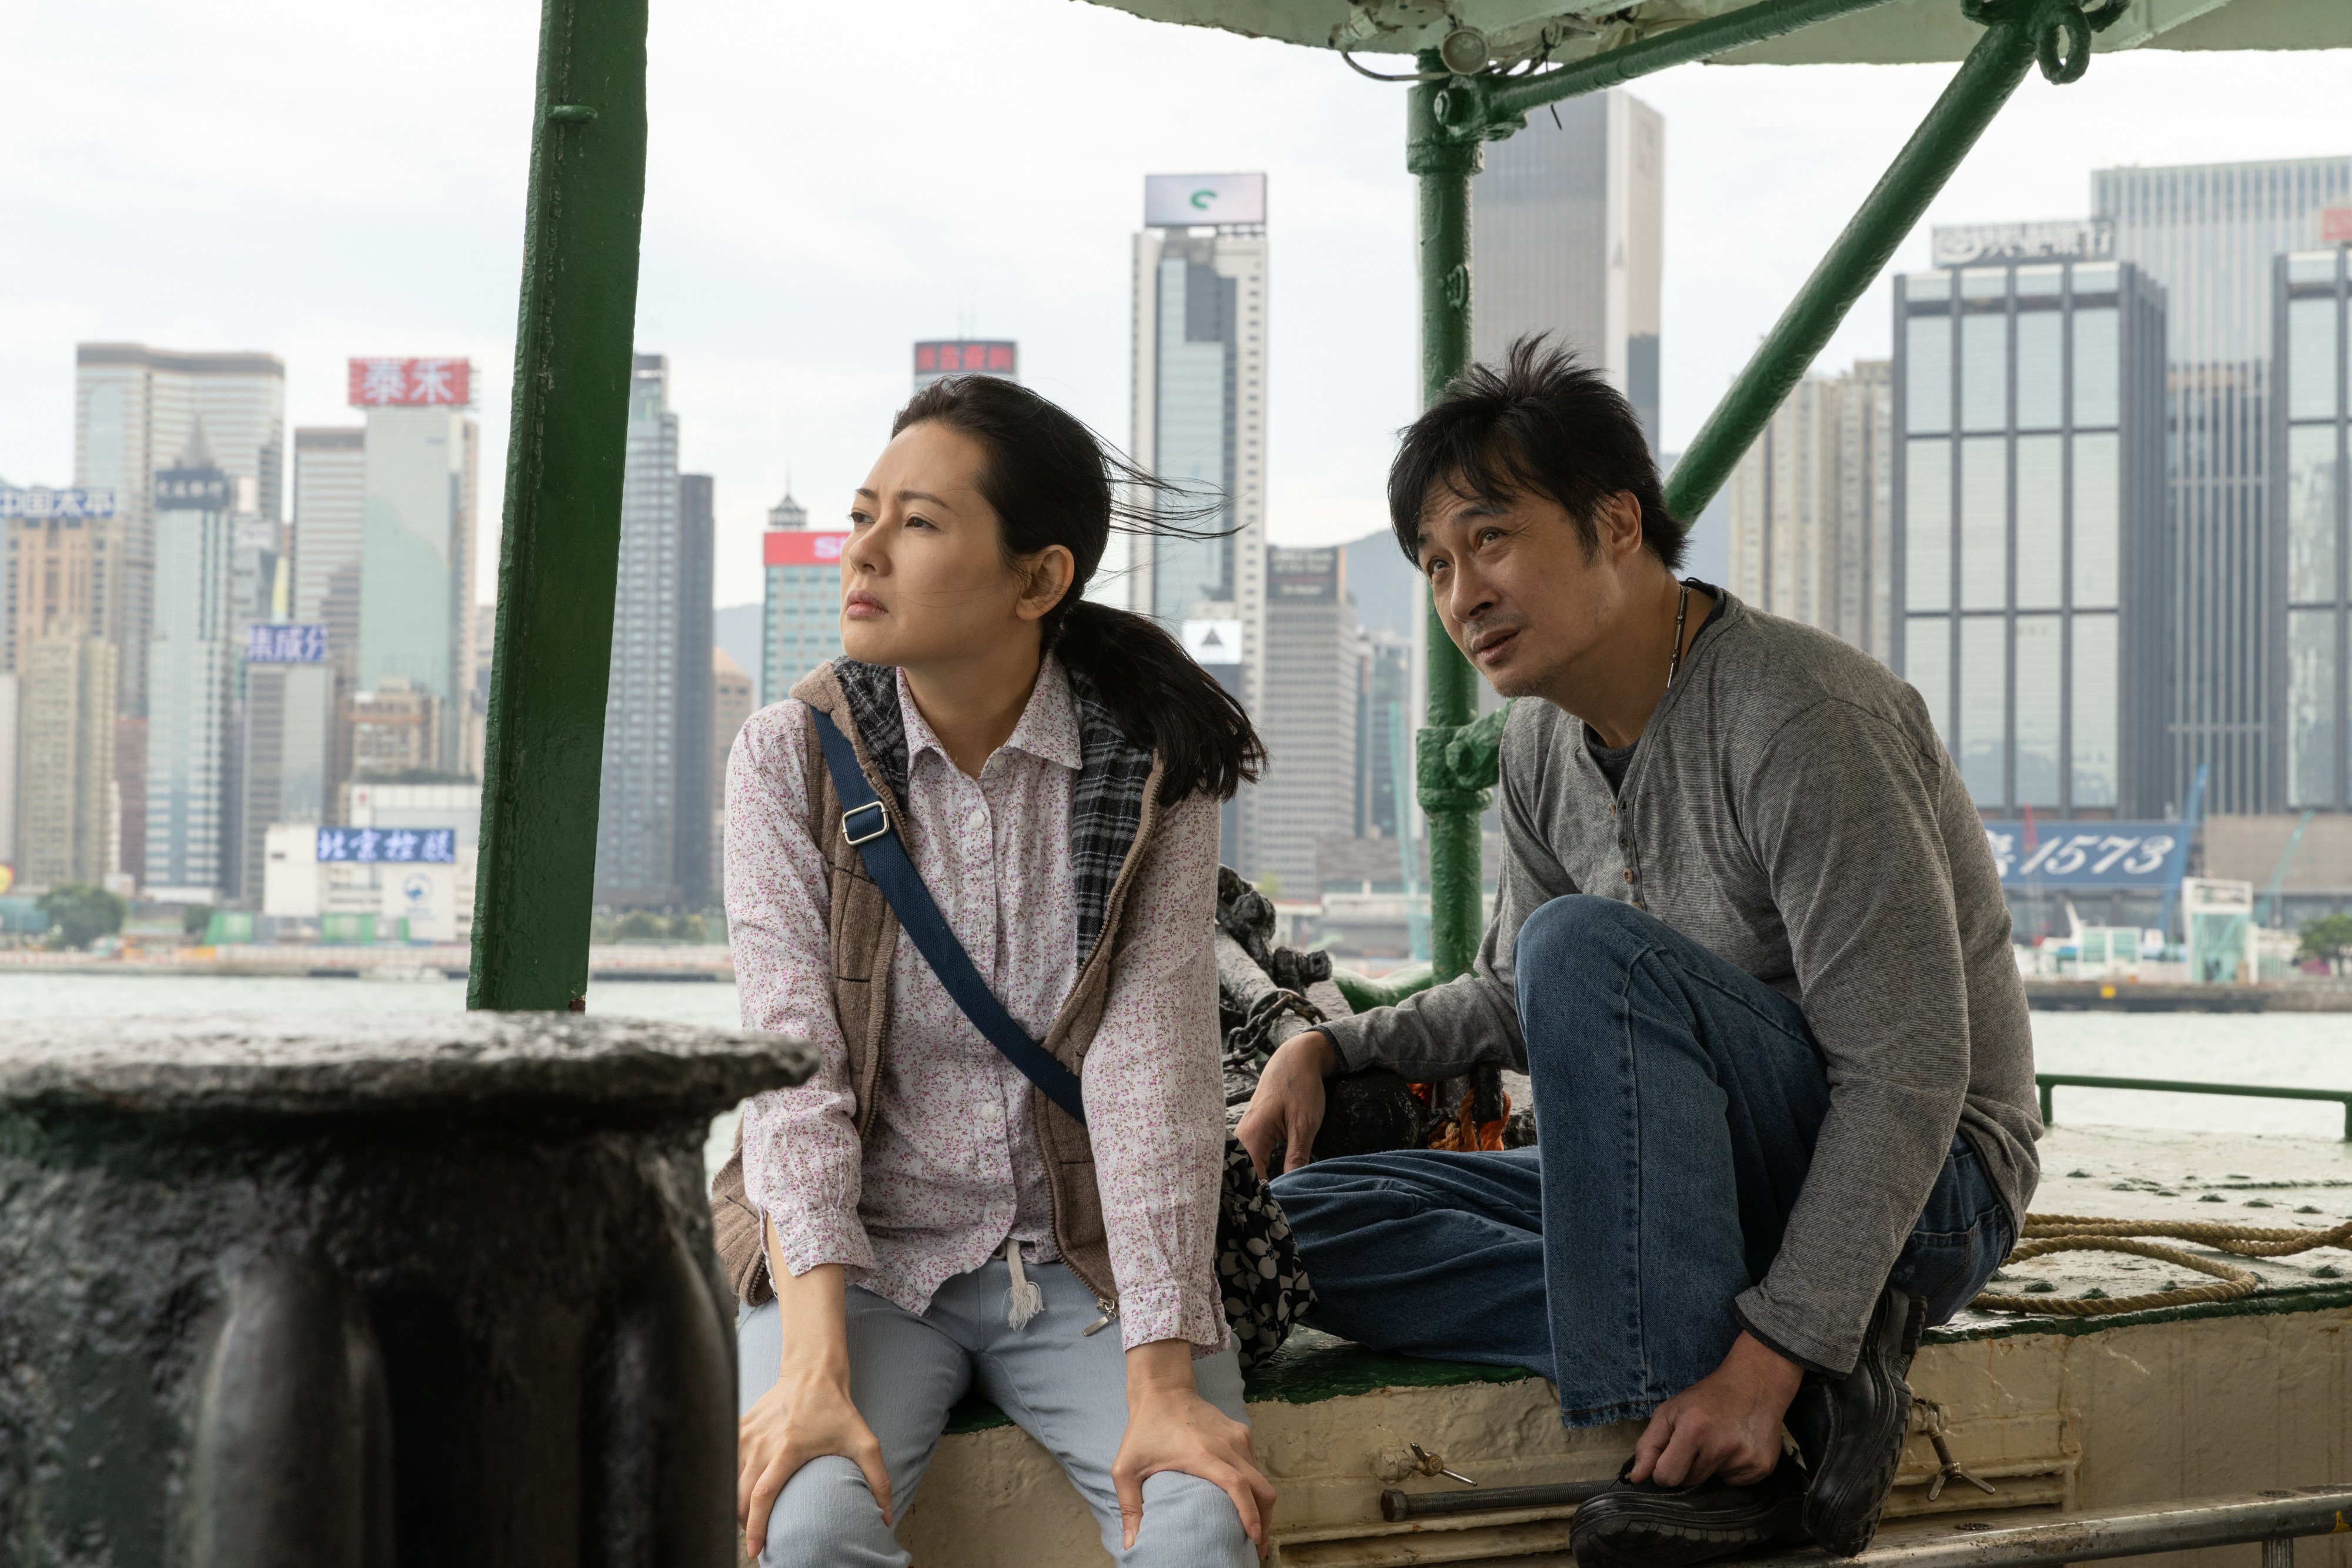 Francis Ng Chun-yu (right) and Loletta Lee Lai-chun in a still from Drifting, a 2021 film about the homeless in Hong Kong. Photo: Riddiculous Studio 